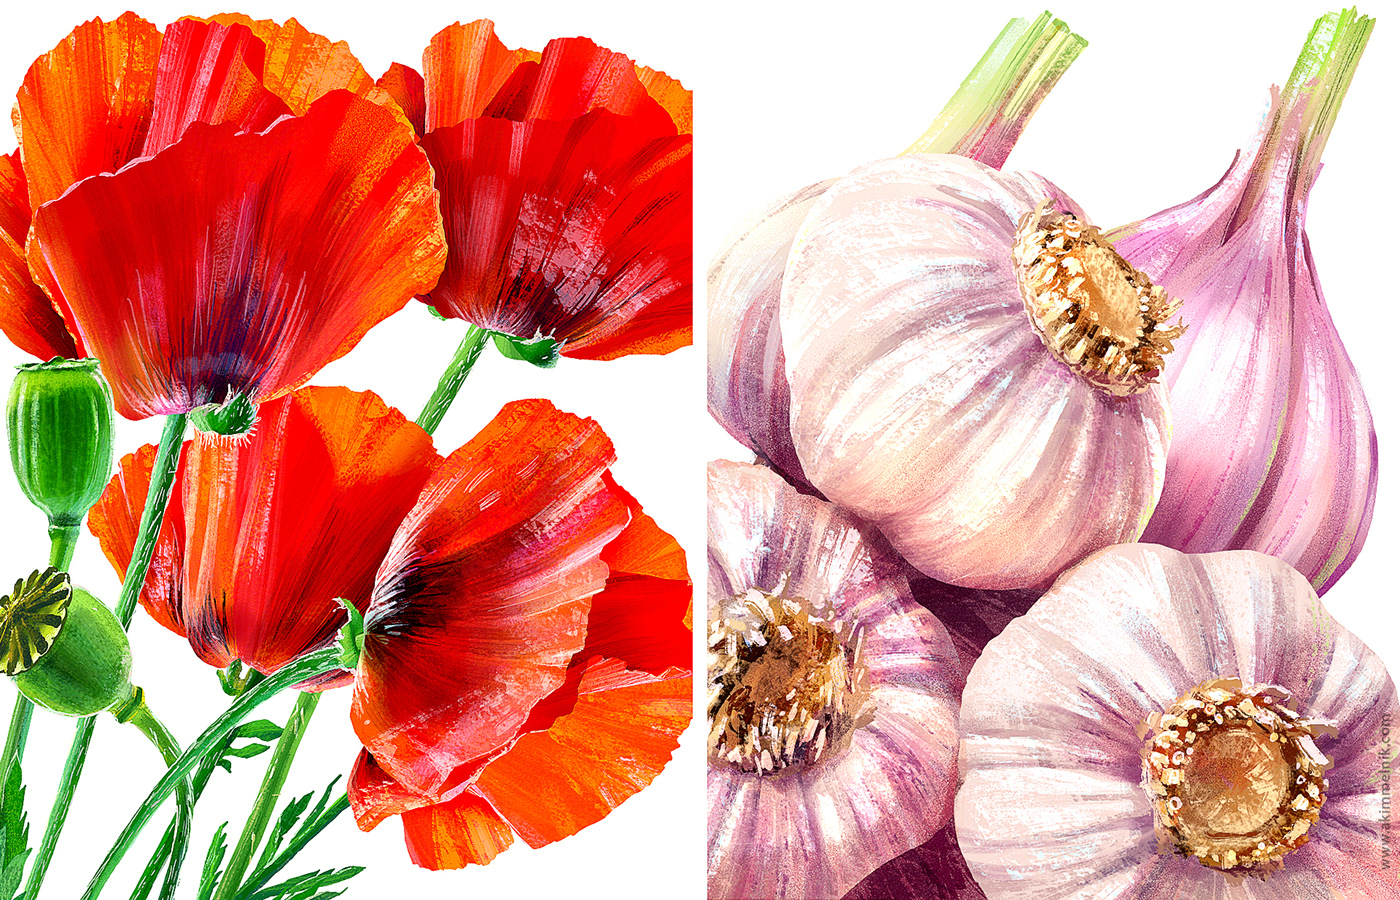 Poppy and garlic illustrations for spice packages